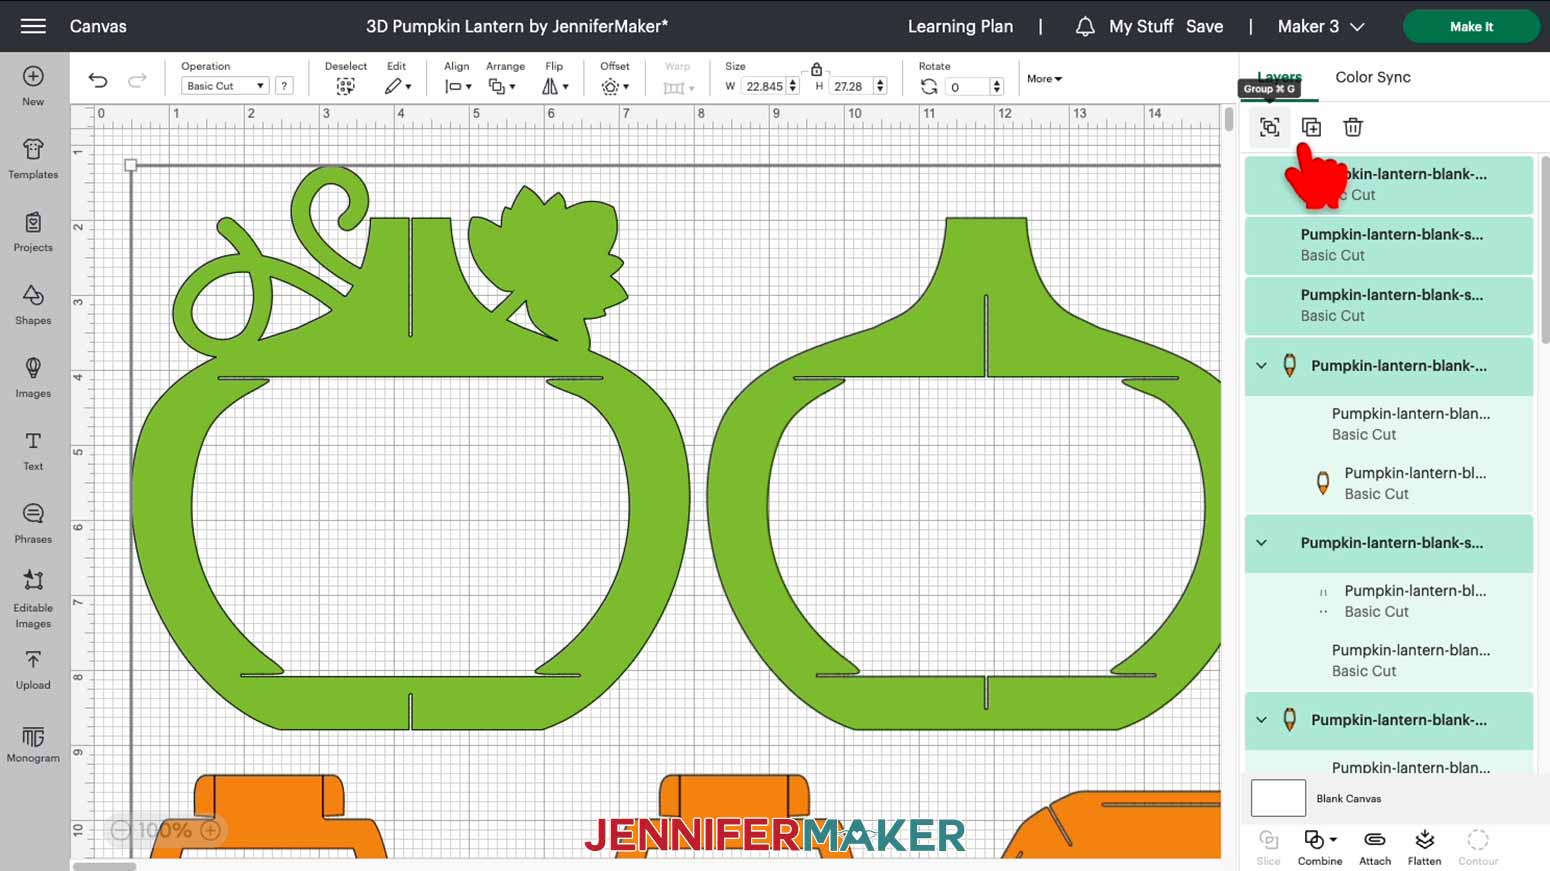 Click the ungroup button in Cricut Design Space to ungroup the 3D pumpkin lantern layers for customization